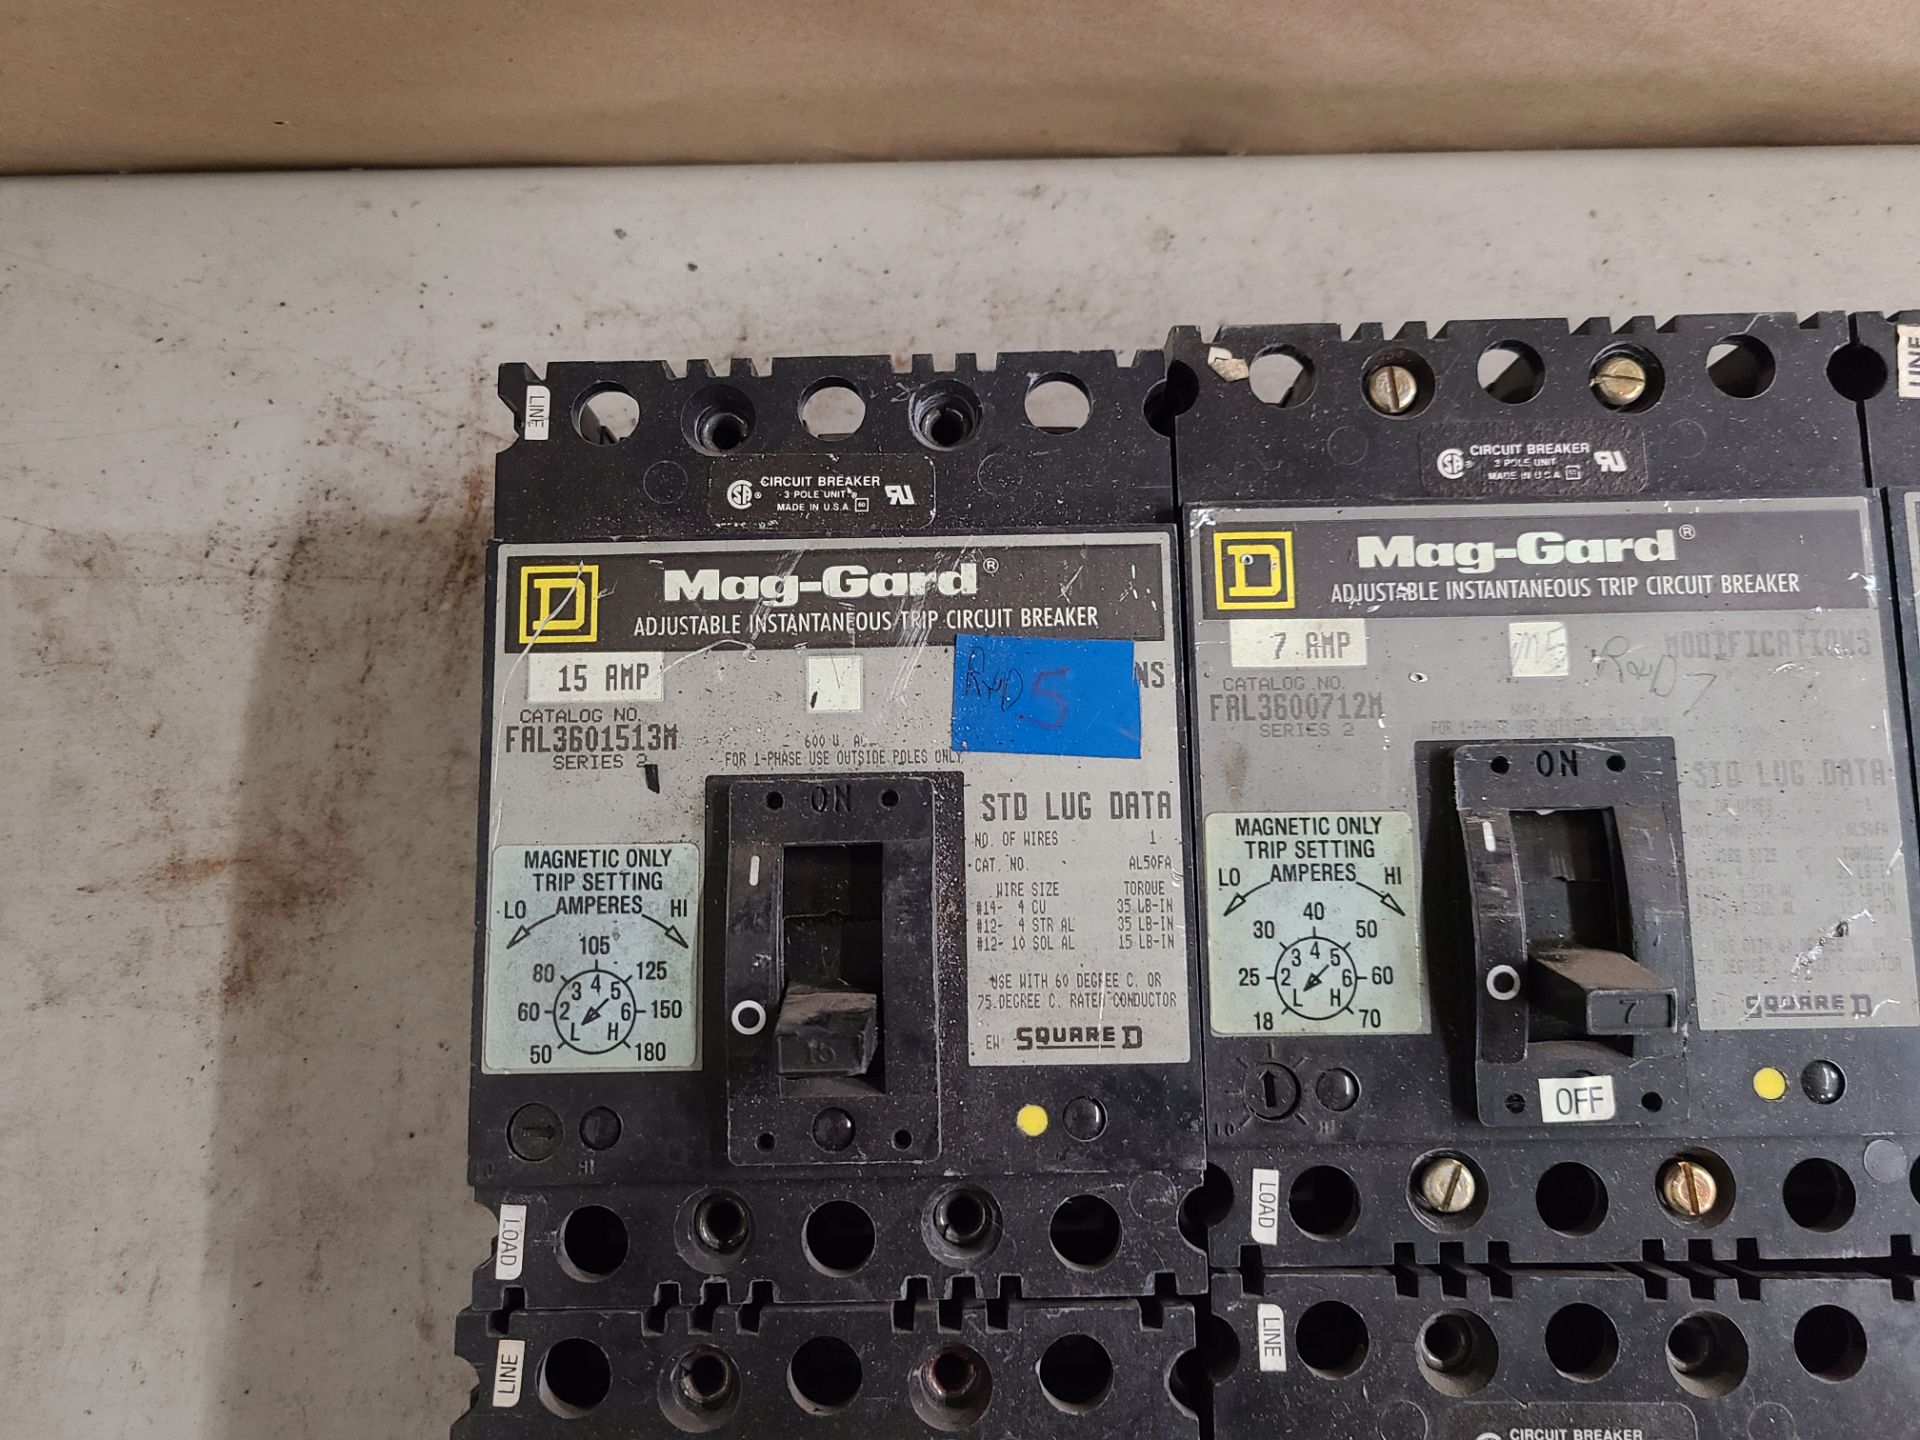 LOT OF SQUARE D MAG-GARD INDUSTRIAL MOLDED CASE CIRCUIT BREAKERS - Image 4 of 11